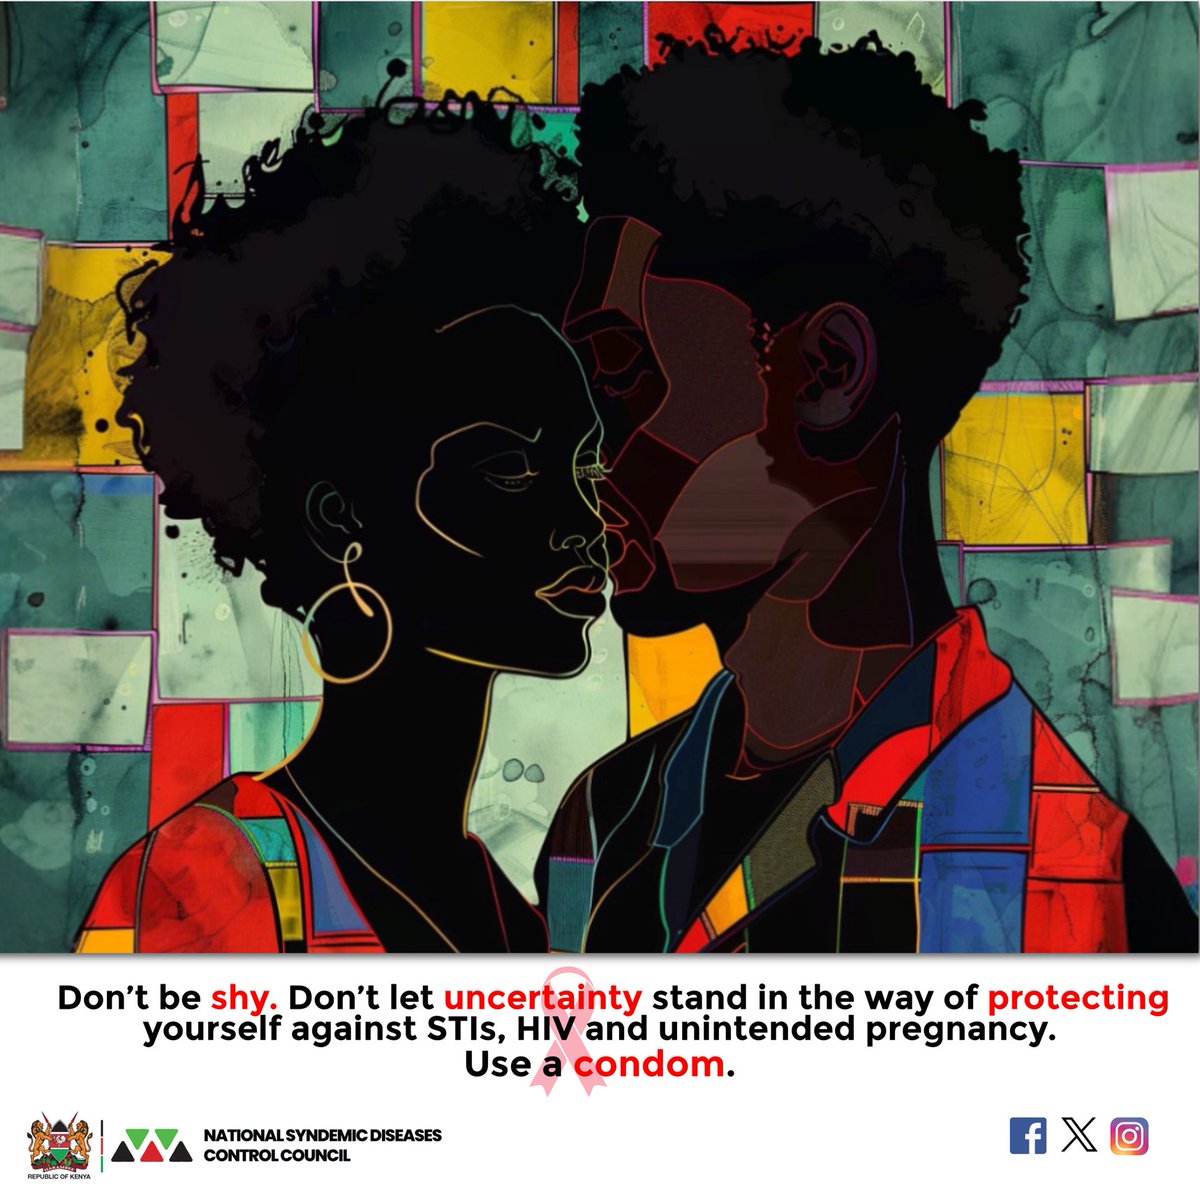 Don’t be shy. Don’t let uncertainty stand in the way of protecting yourself against STIs, HIV and unitended pregnancy. Use a condom. #EndAIDSby2030